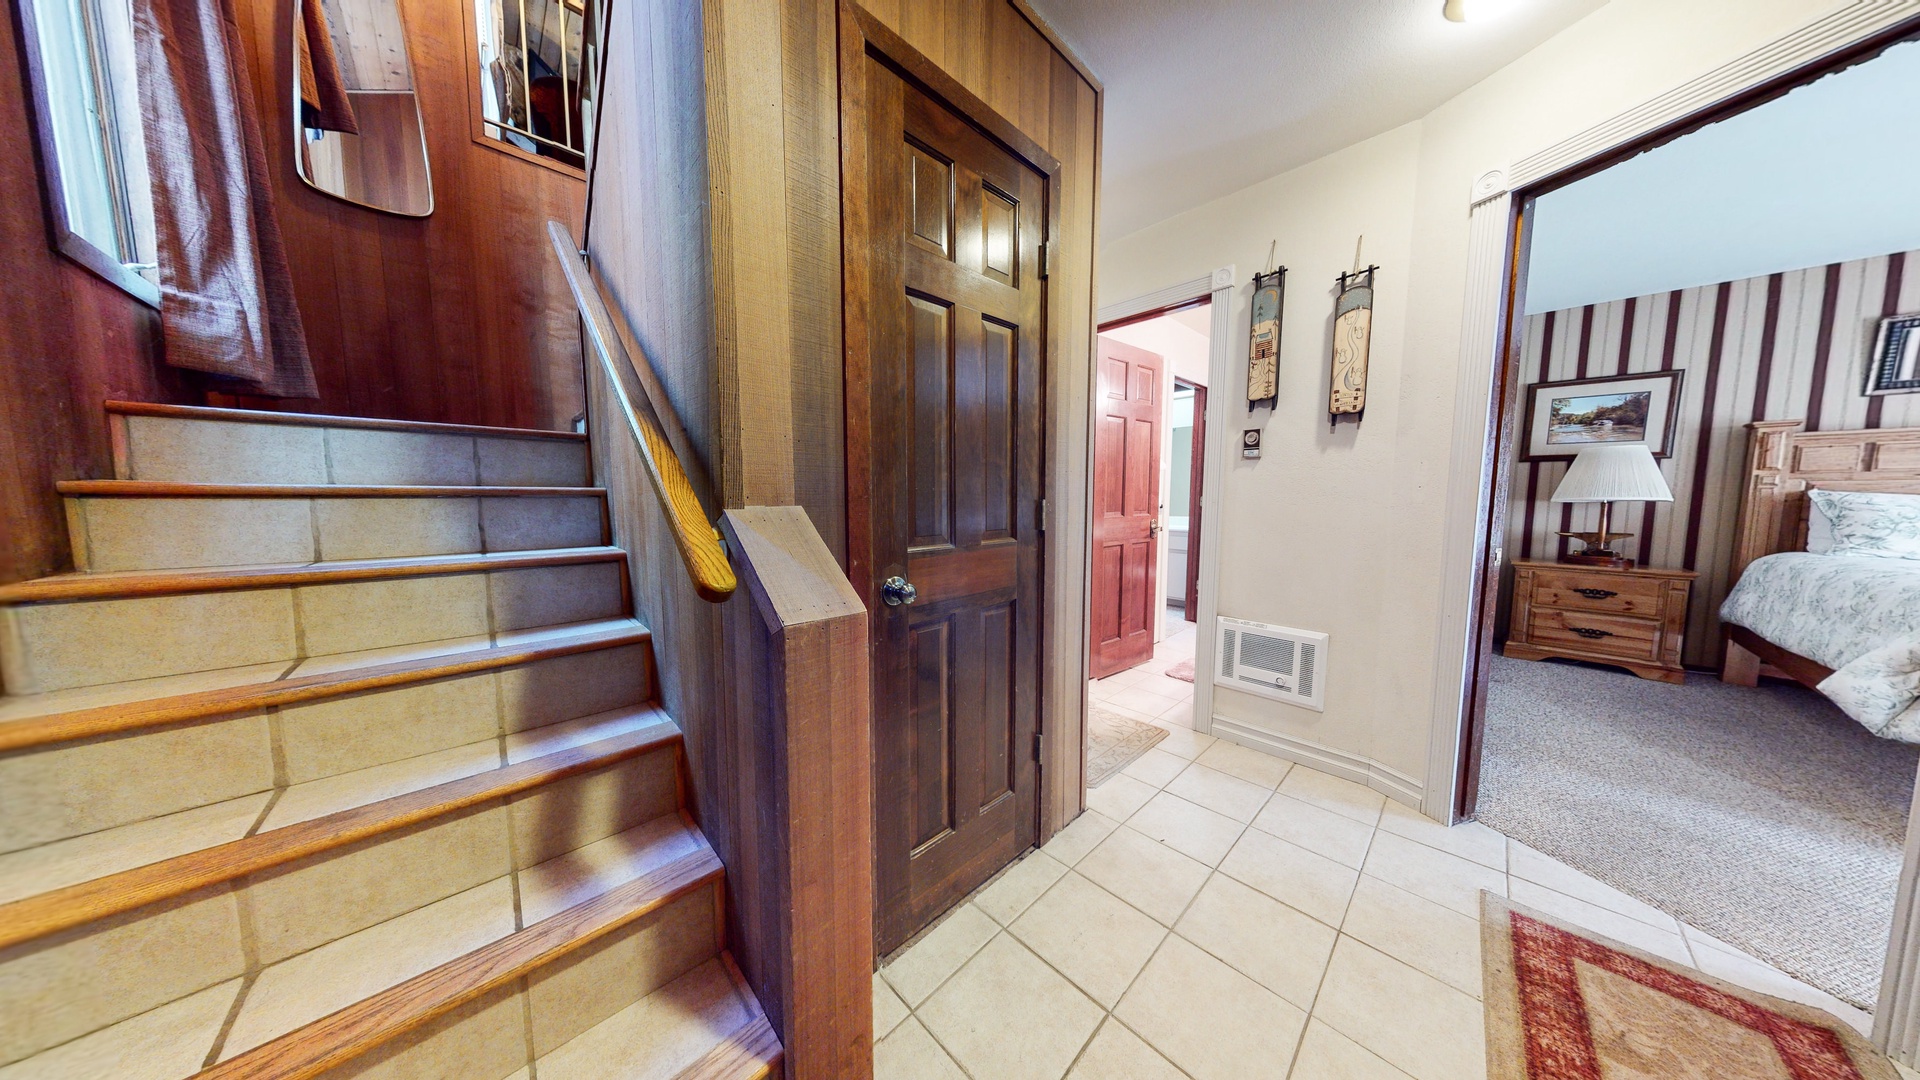 Staircase to bedrooms